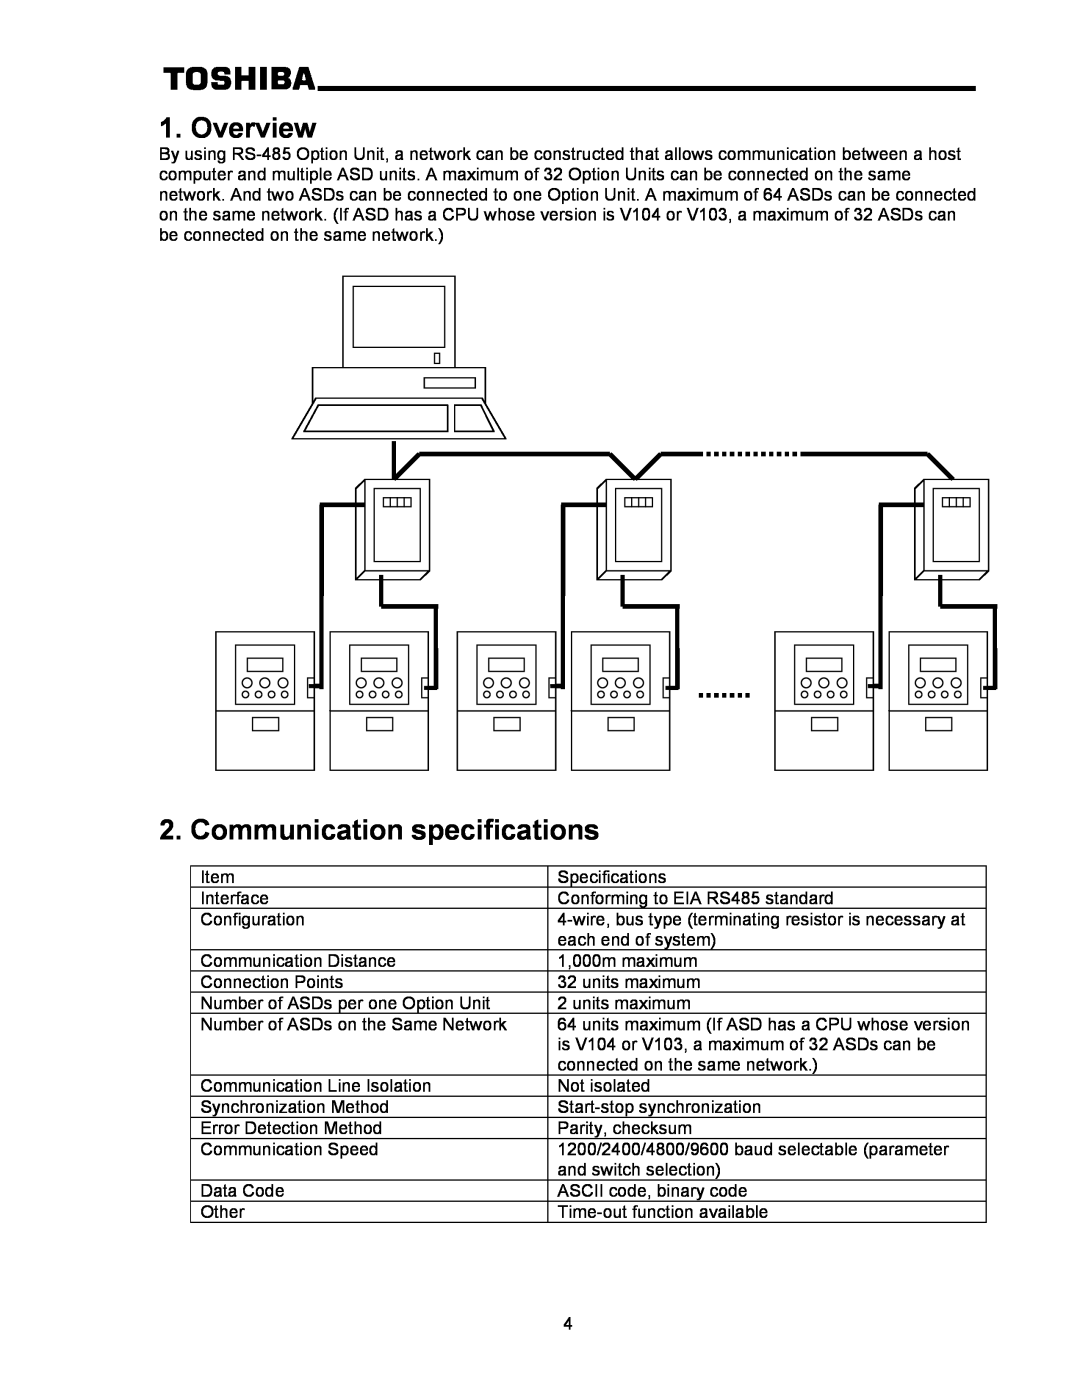 Toshiba RS-485 operation manual Overview, Communication specifications 